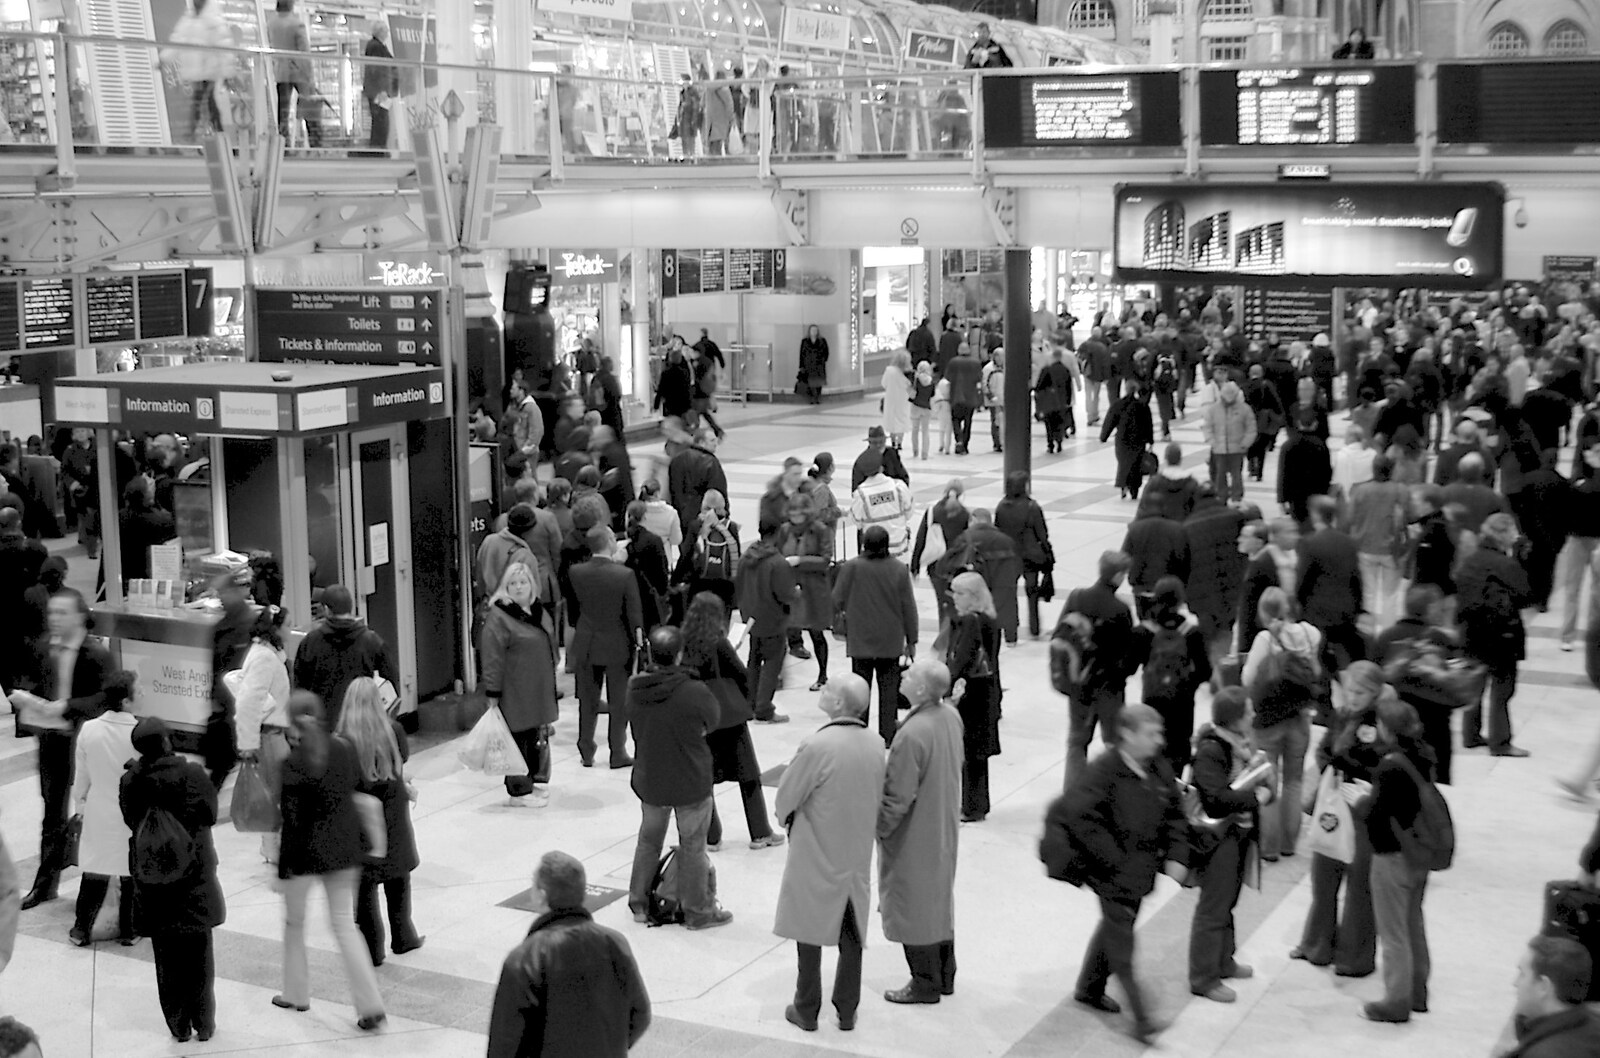 Crowds mill around at Liverpool Street from London in the Rain - 18th November 2004